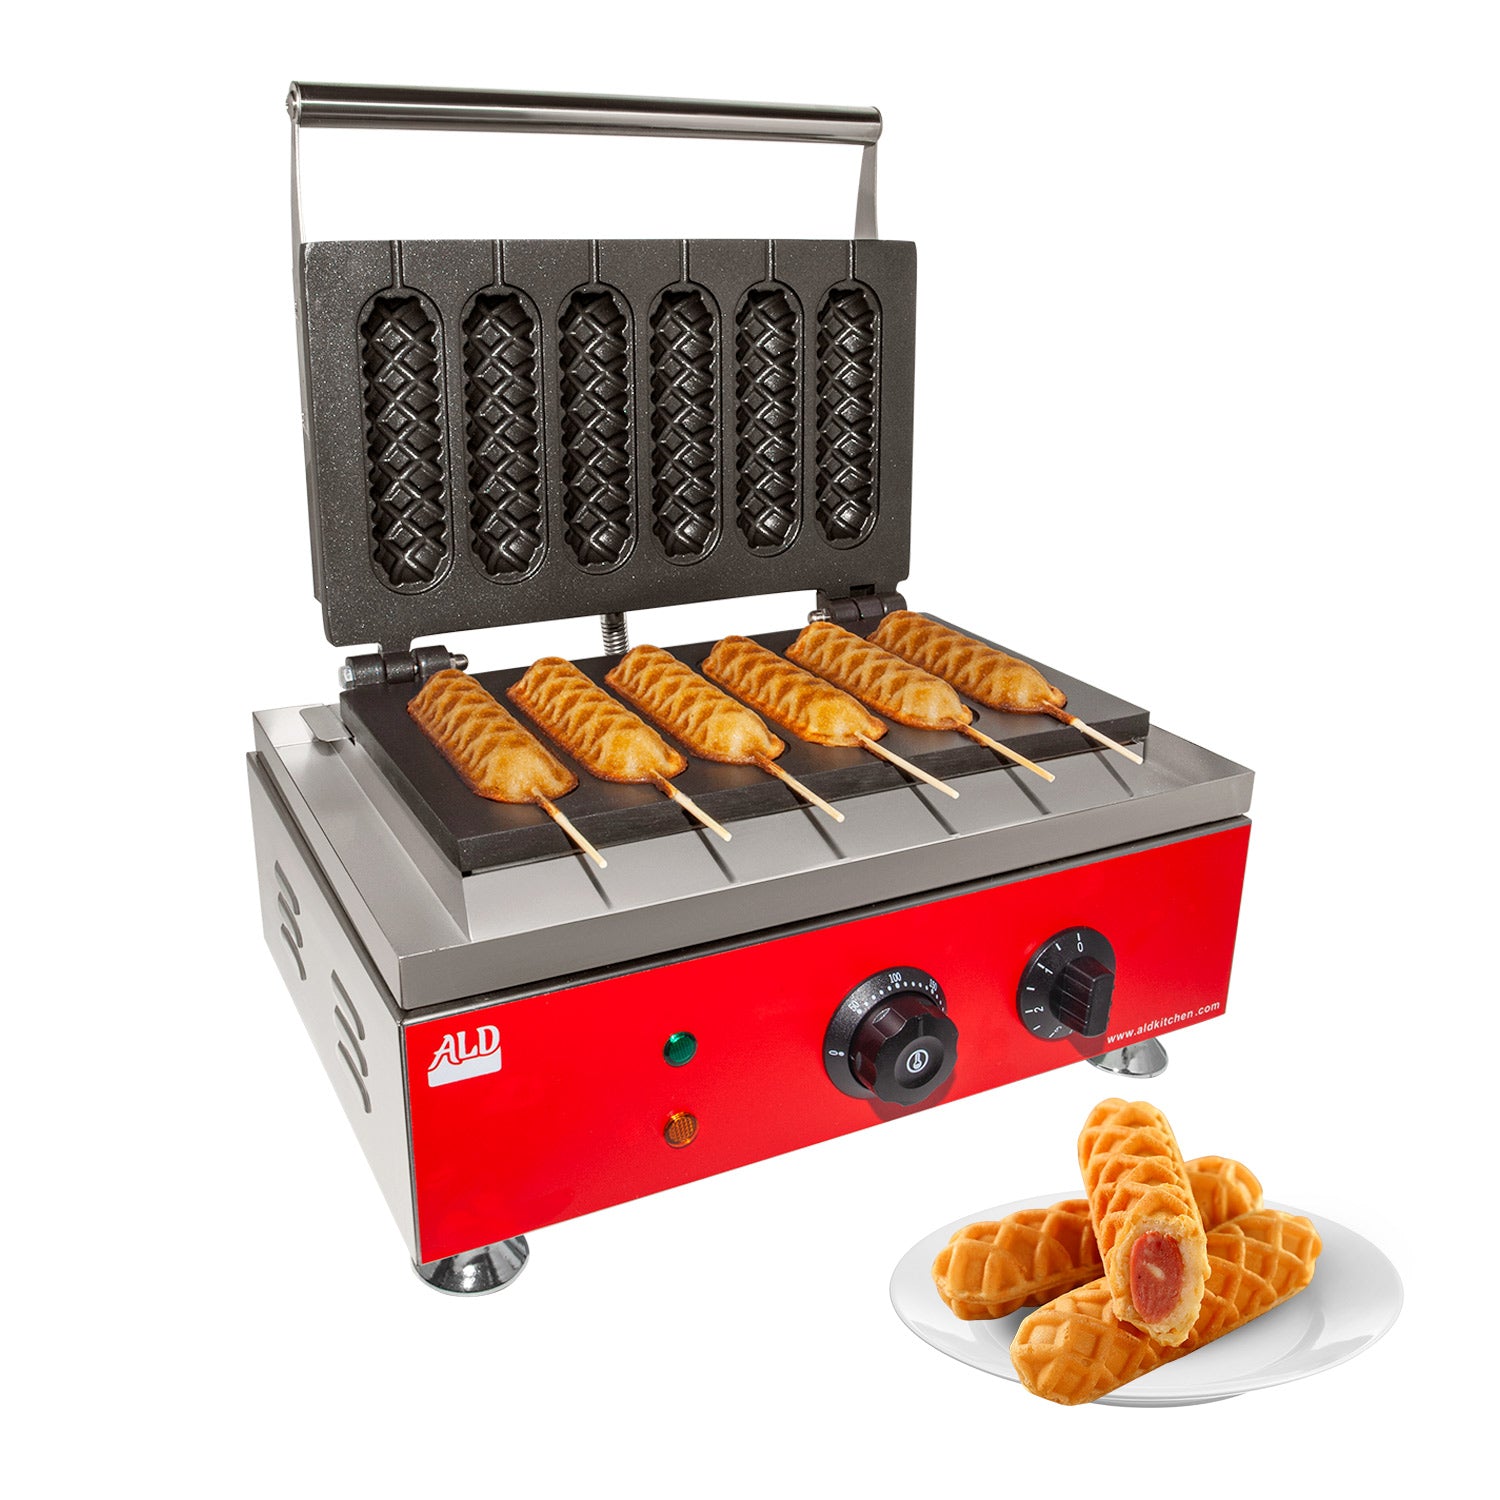 ALDKitchen Belgian Waffle Iron Press Type Professional Use Stainless Steel Nonstick 110V (6 Waffle on a Stick) - 4